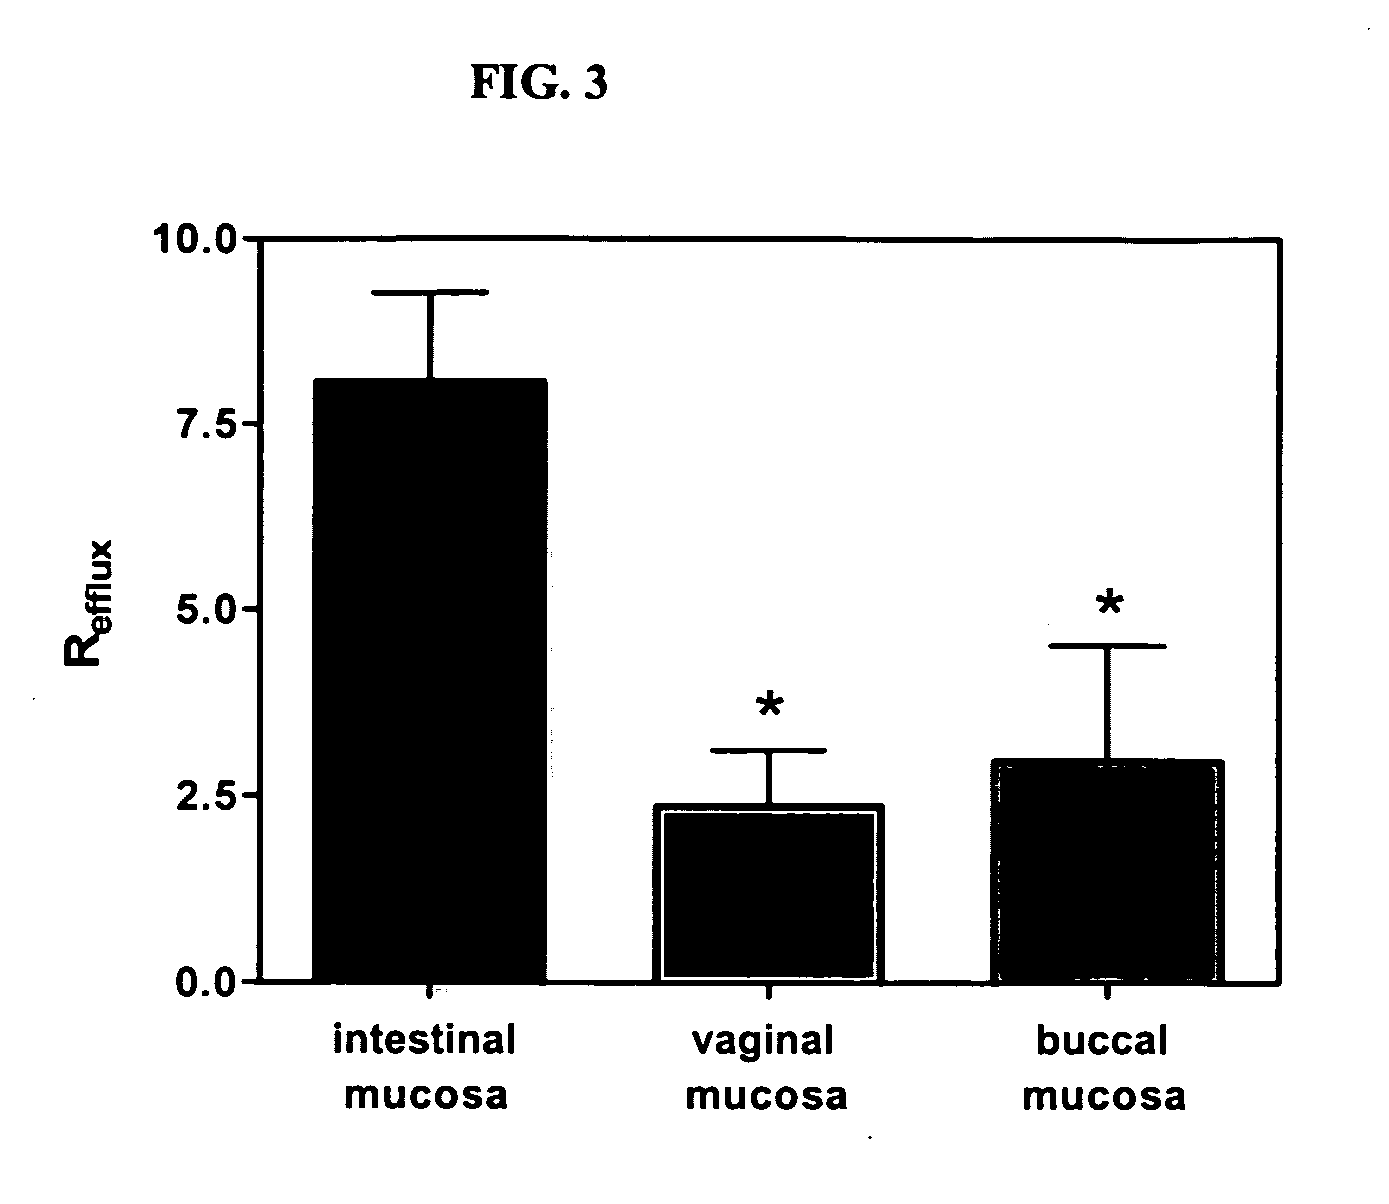 Method for augmentation of intraepithelial and systemic exposure of therapeutic agents having substrate activity for cytochrome P450 enzymes and membrane efflux systems following vaginal and oral cavity administration